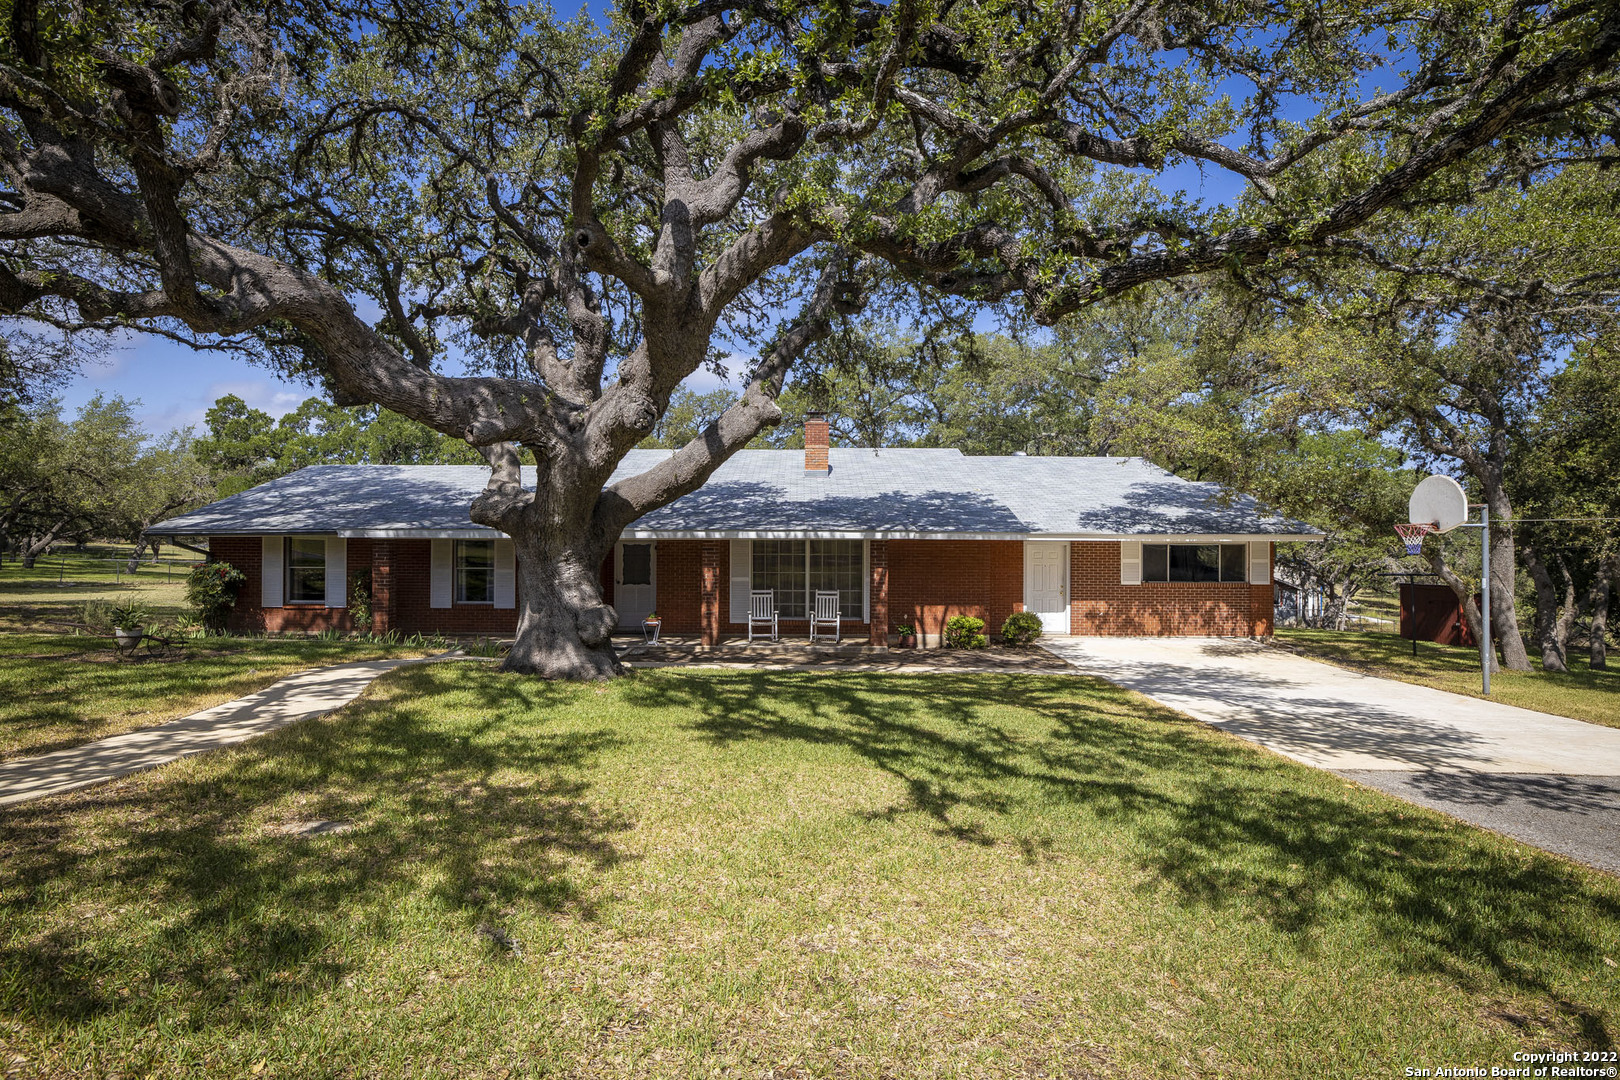 ***OPEN HOUSE 7/2 10-2***As you pull up to this Hill Country Home, you are greeted with a massive Oak tree that is soaring into the sky with lovely climbing limbs and rich history! On almost 3 acres, this home allows for endless opportunities; 4H/FFA projects, stalls, tack area, 3+ car carport, circle drive, mature & wooded trees with woods to explore & so much more! You are RIGHT in the middle of it all, located right next to Timberwood Park, off Borgfeld Rd, close to the BRAND NEW PIEPER HS, grocery stores, shopping, etc & no HOA! Bring your boats, RVs, trailers, & have a ball! As you enter the exceptionally maintained home, you are greeted with over 3,000 sq feet of entertaining space. Two living areas, 2 dining areas, dual masters & a fireplace that is magazine worthy! The kitchen features a window out to view your property with custom cabinets, island kitchen and an open floorplan that allows for a functional flow & great space for your family! The back porch is covered and elevated for a fantastic breeze for all of your Texas sunsets. Step off the porch to lovely trees, mature landscaping & opportunities to make this space your own! This is a Texas dream come true!!